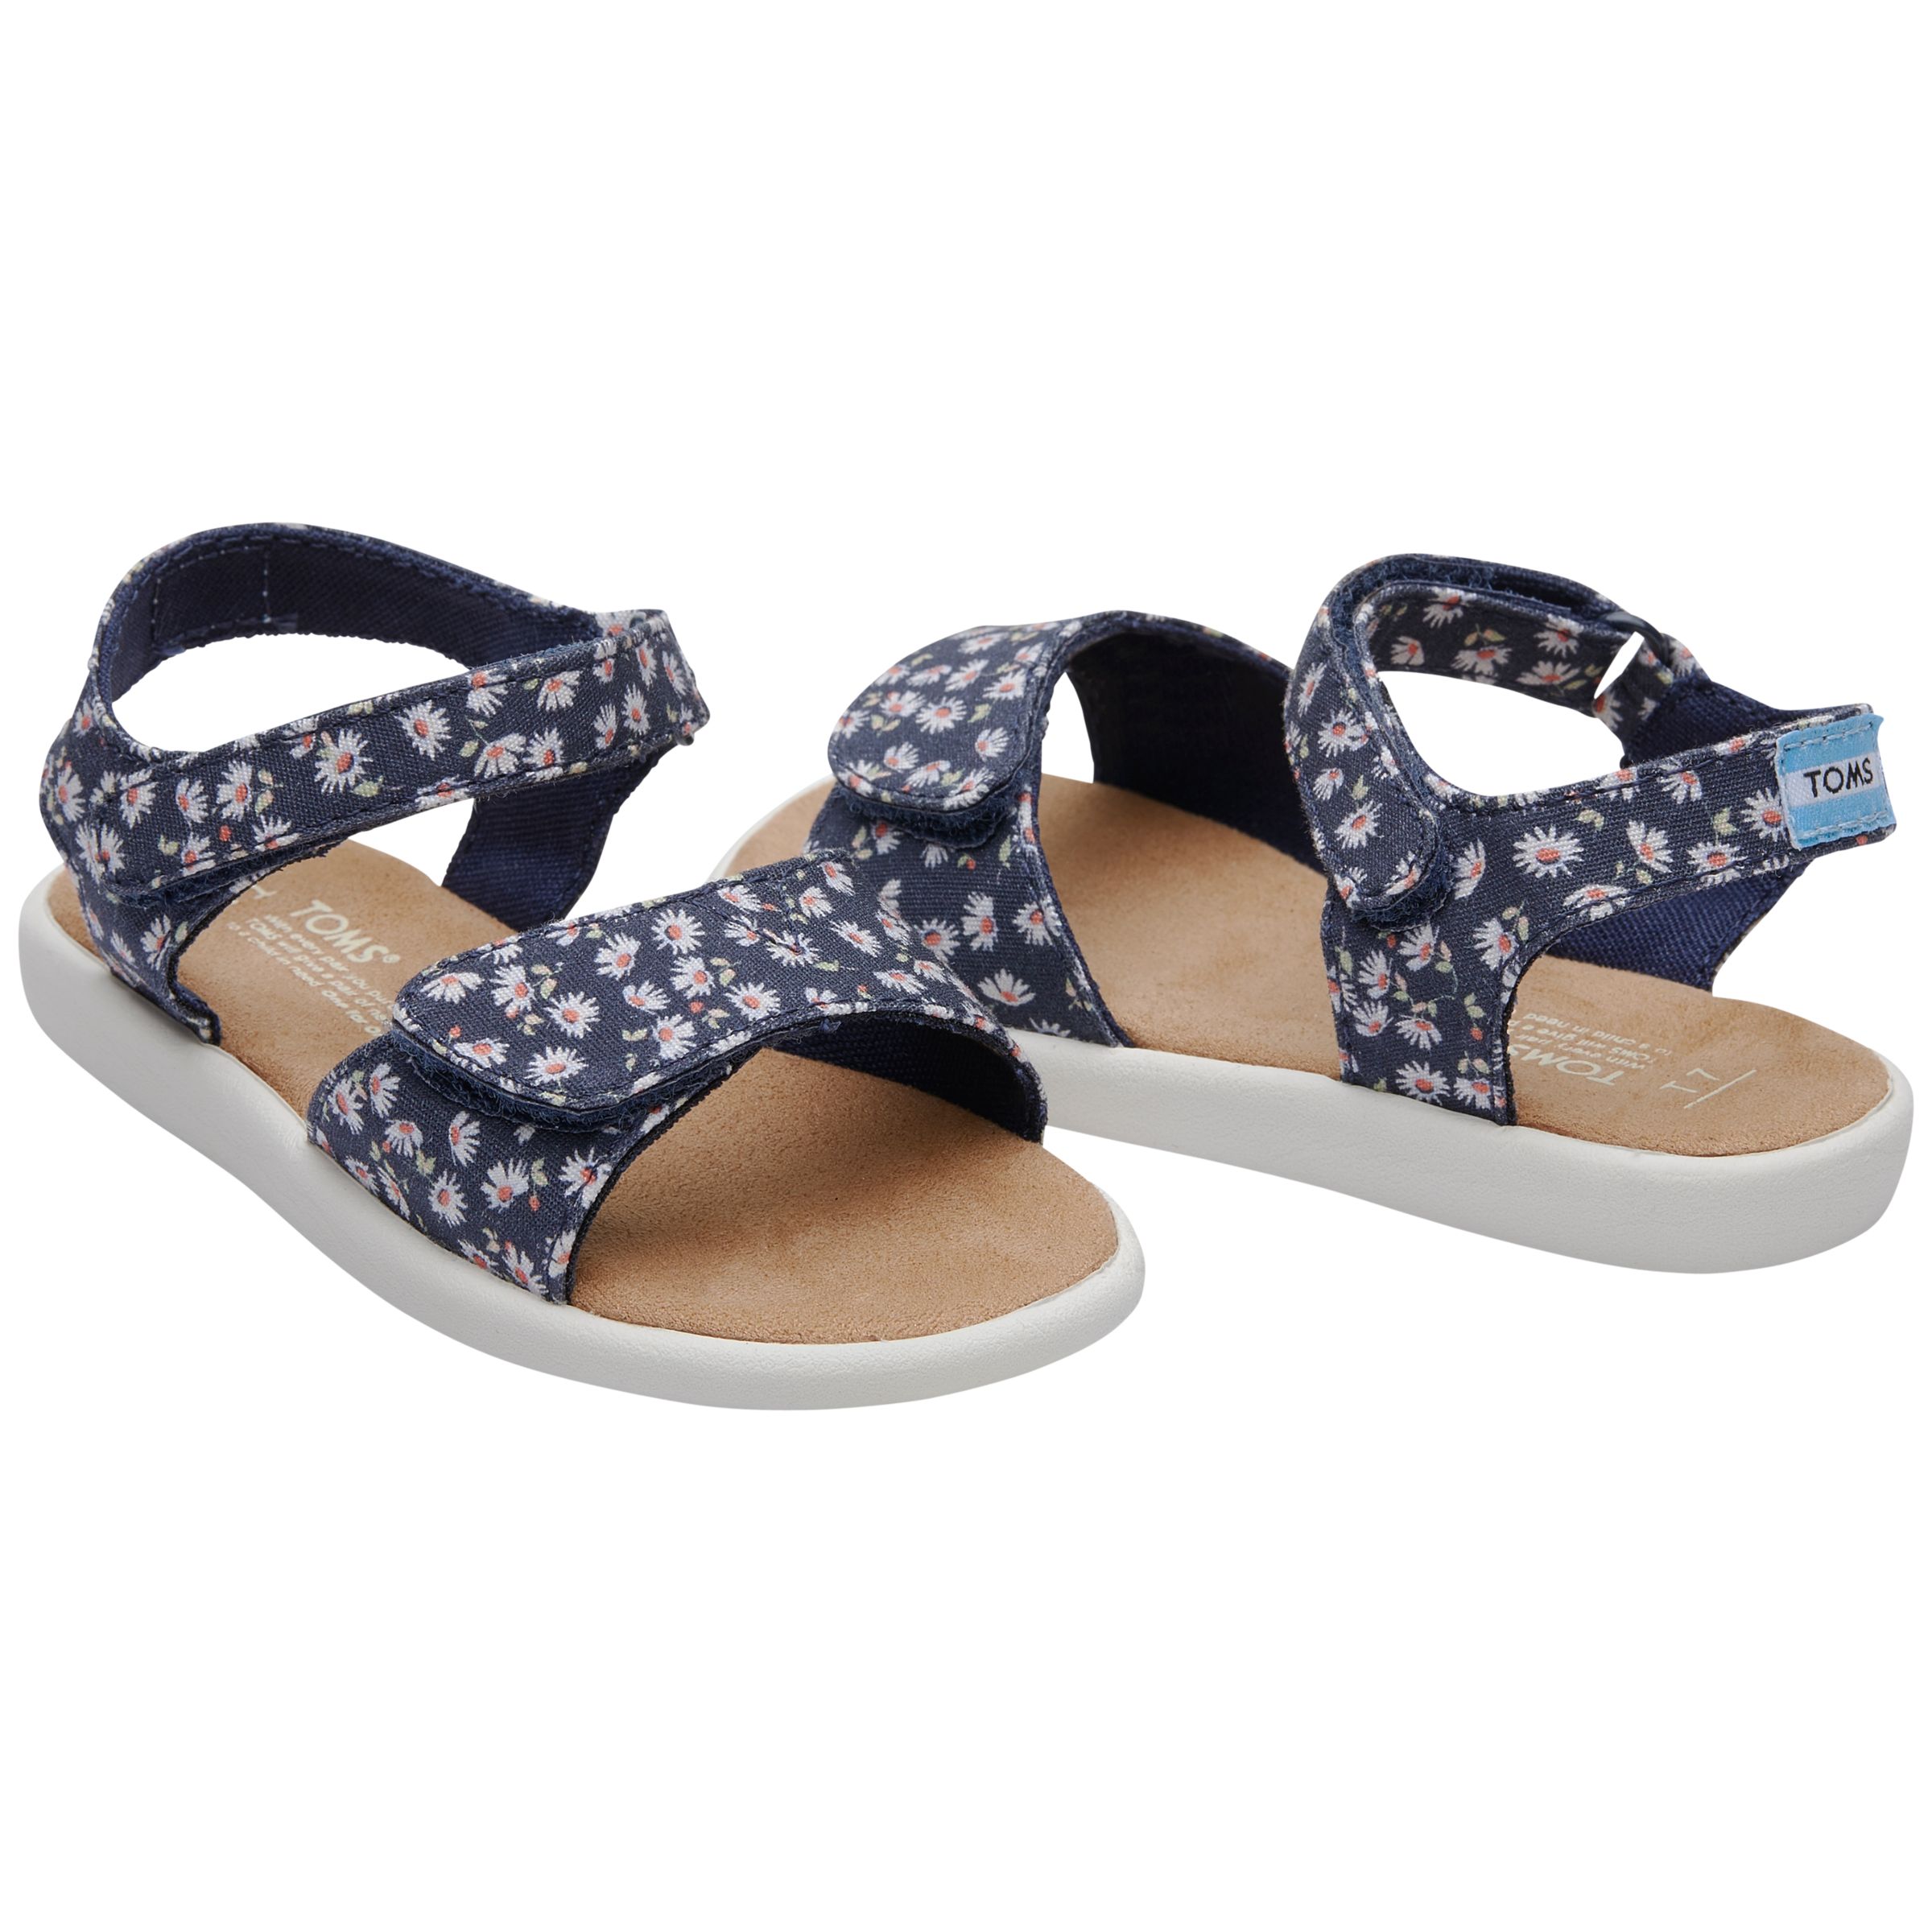 TOMS Children's Strappy Chambray Sandals, Navy Floral, 10 Jnr